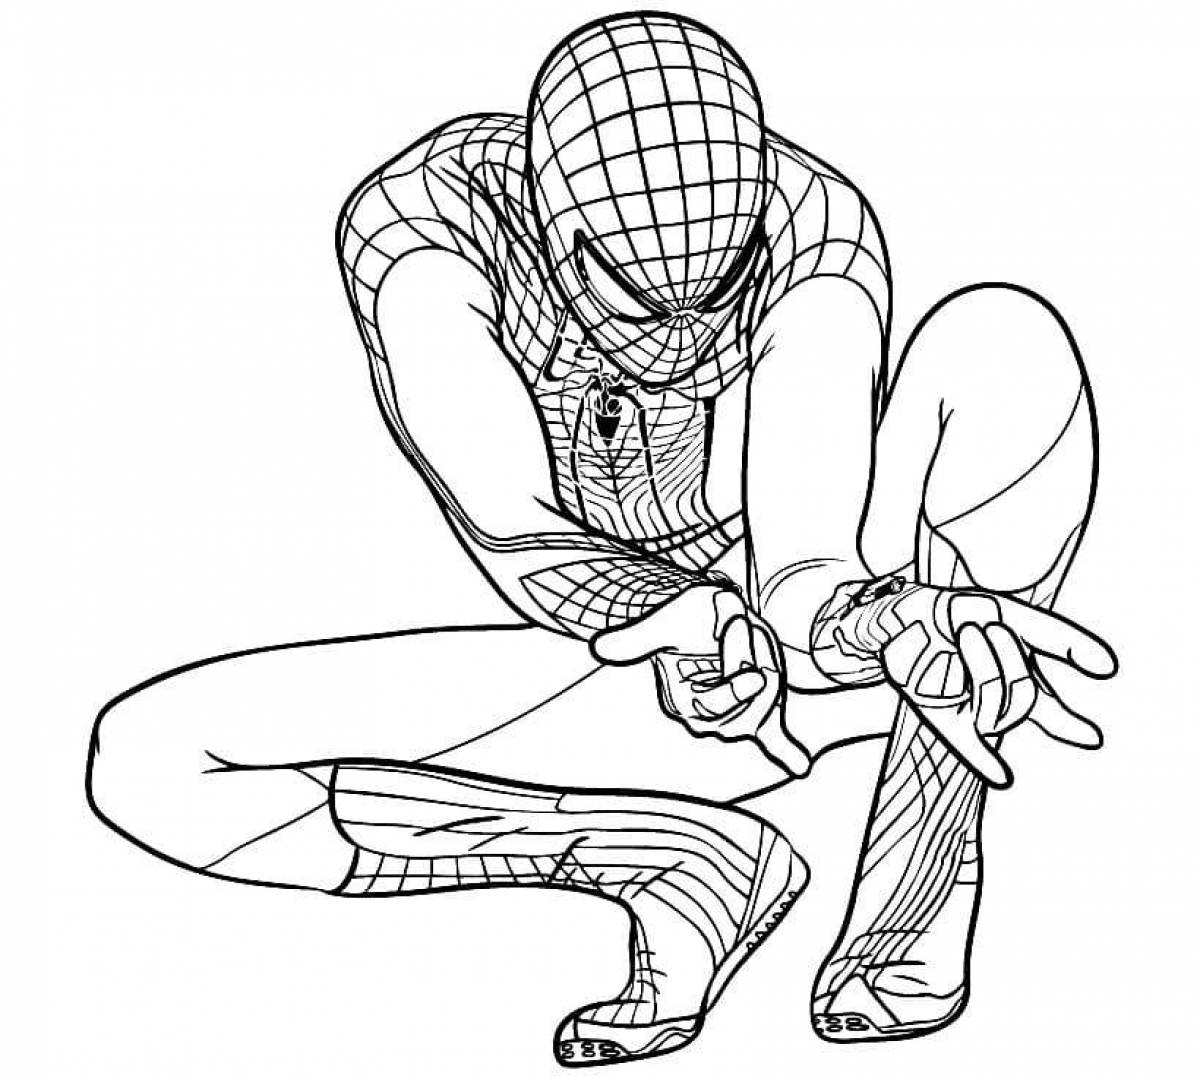 Spiderman's entertaining coloring book